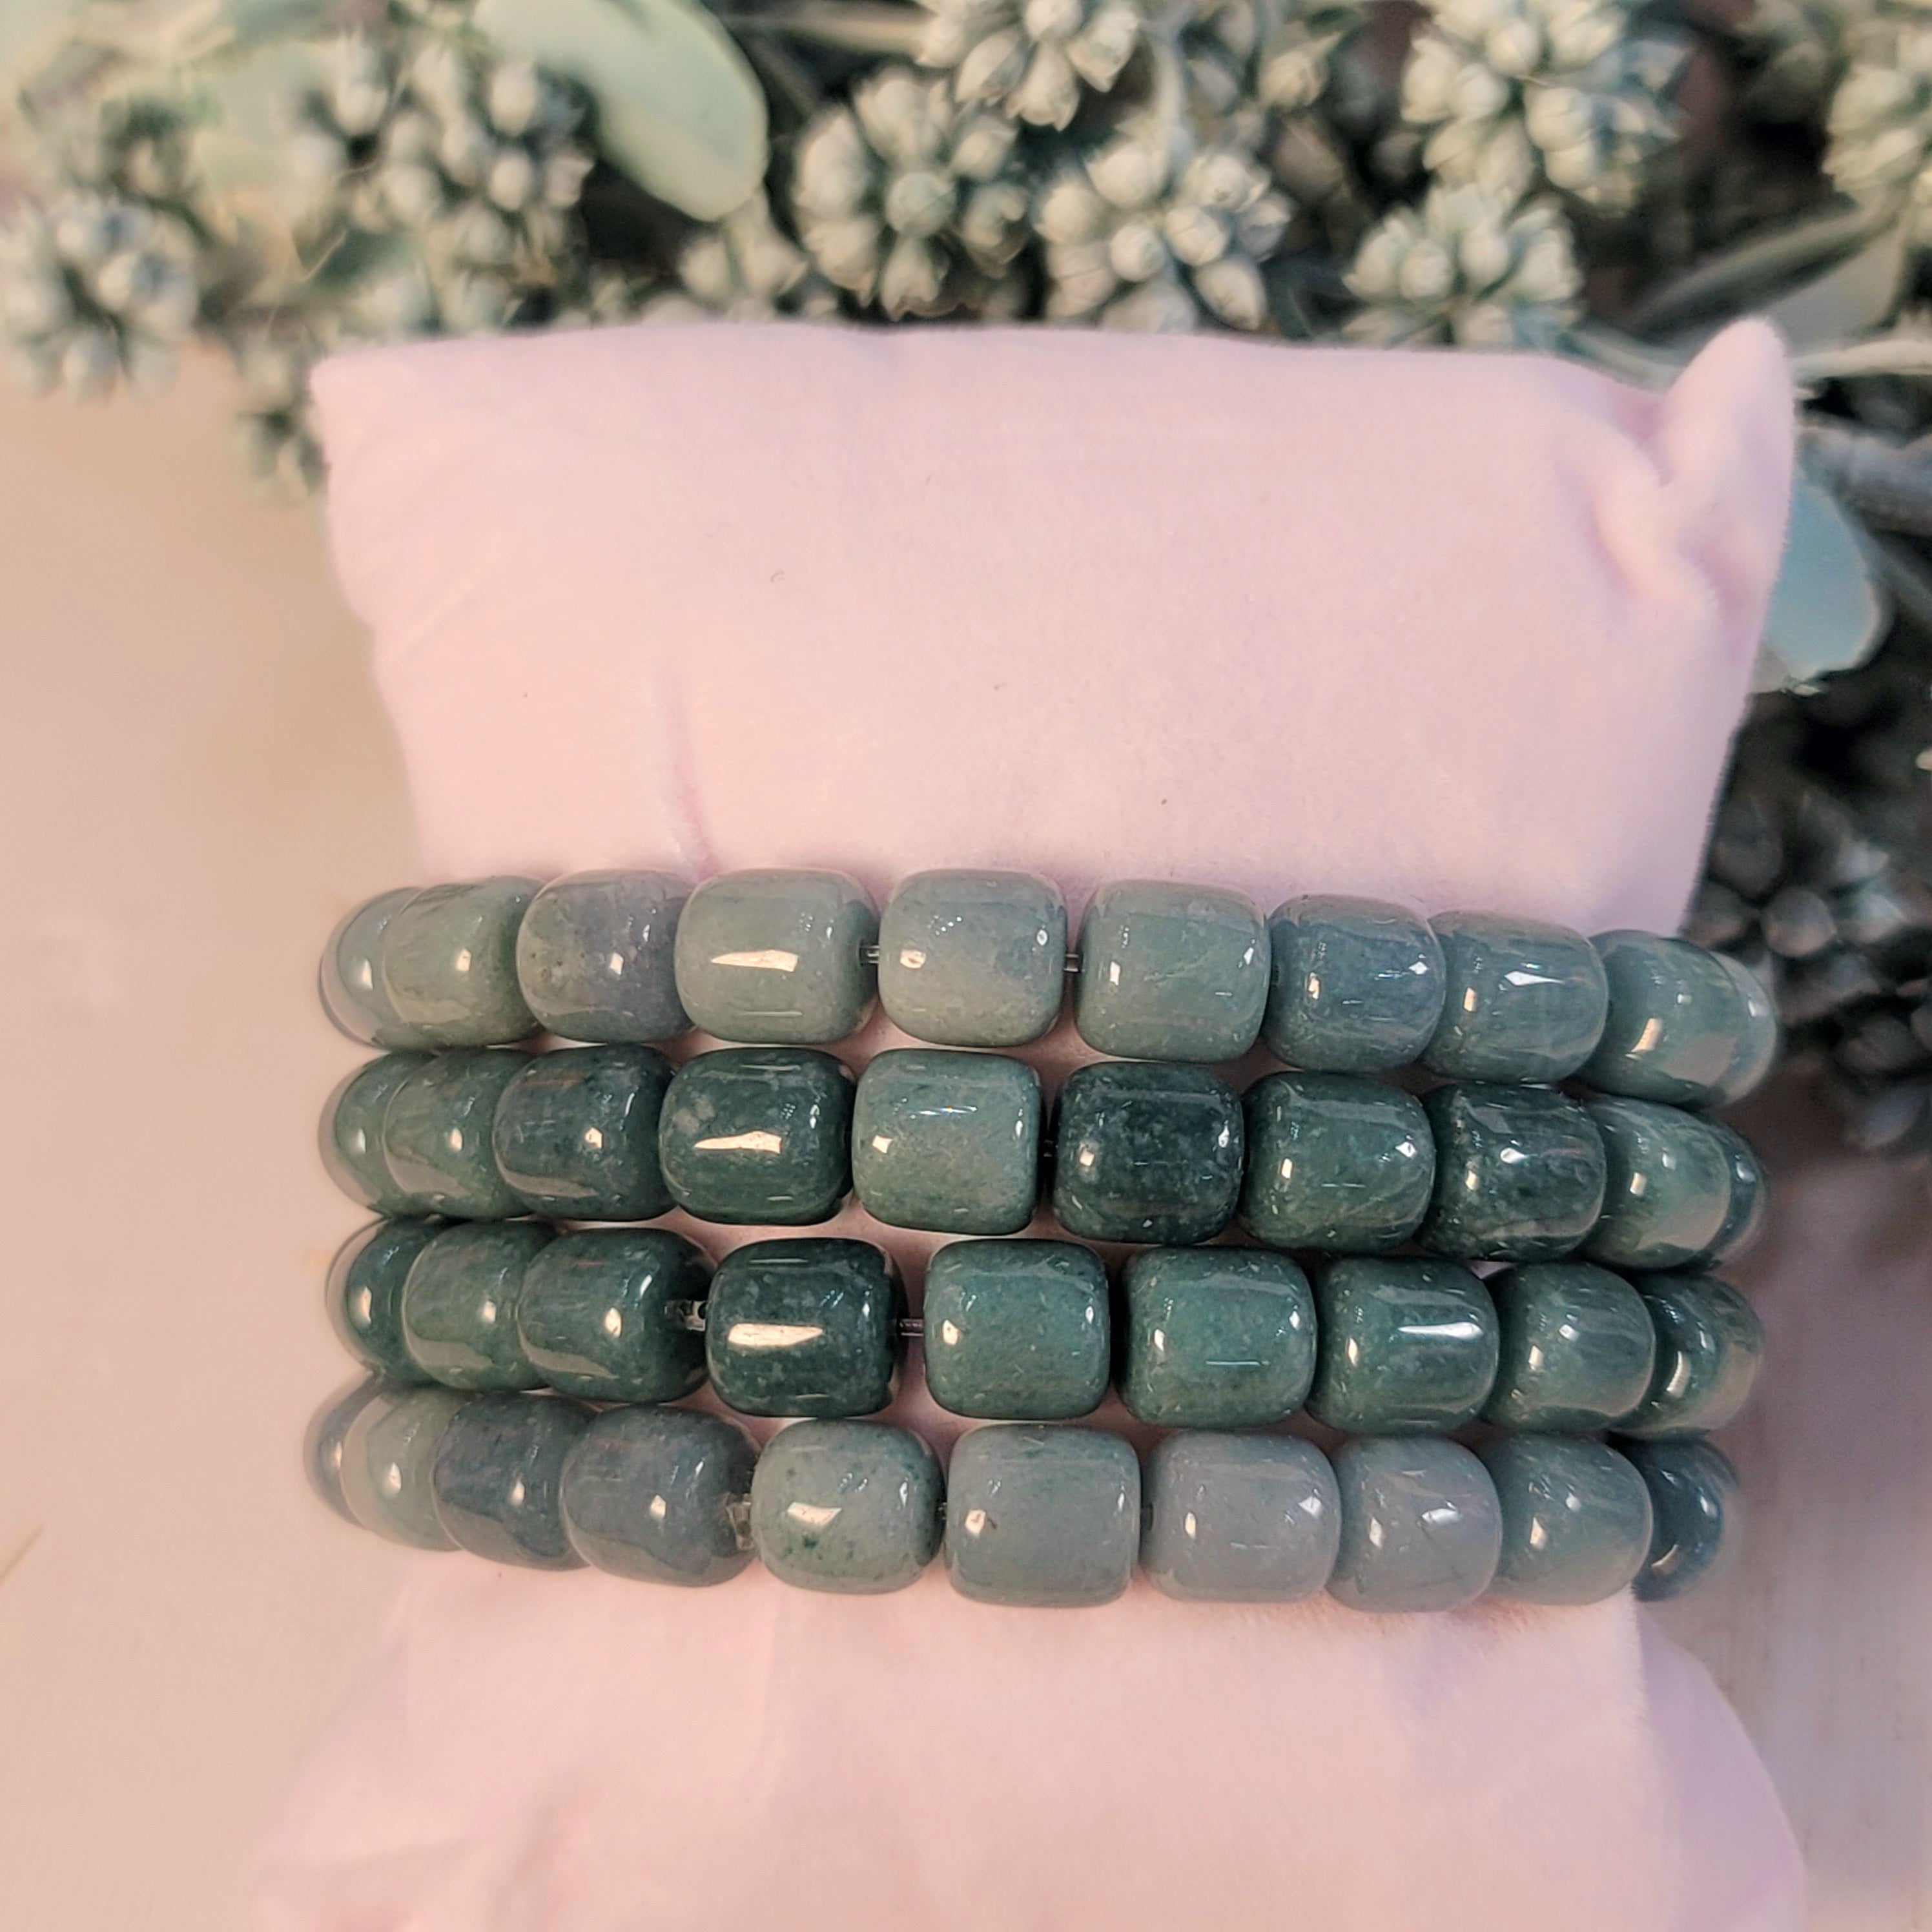 Guatemalean Blue Jadeite Marshmellow Bracelet for Protection and Luck